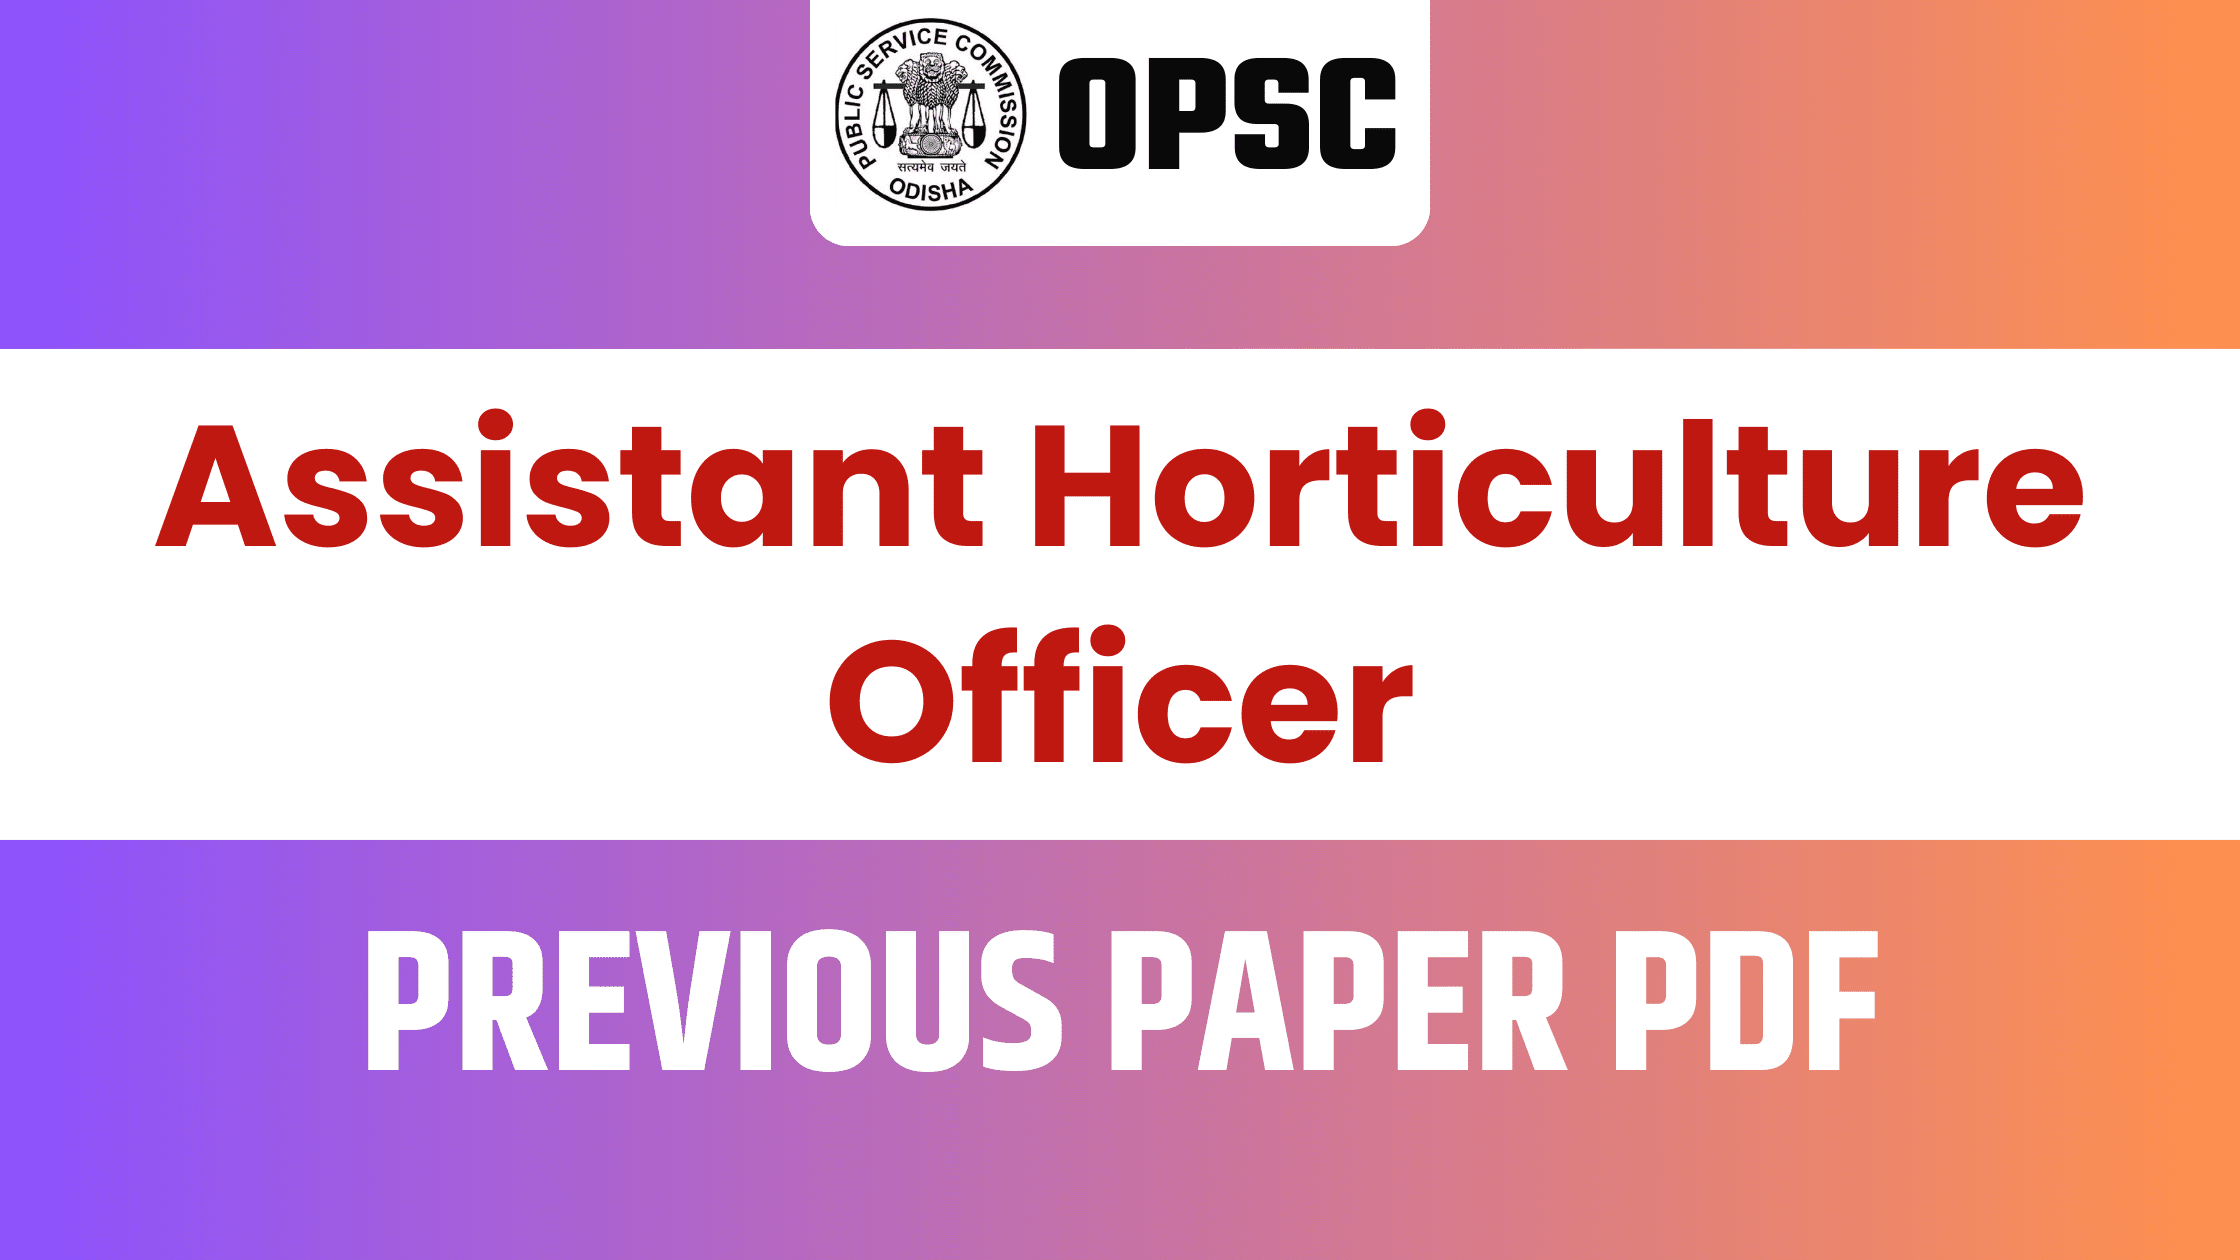 OPSC Assistant Horticulture Officer Previous Papers PDF